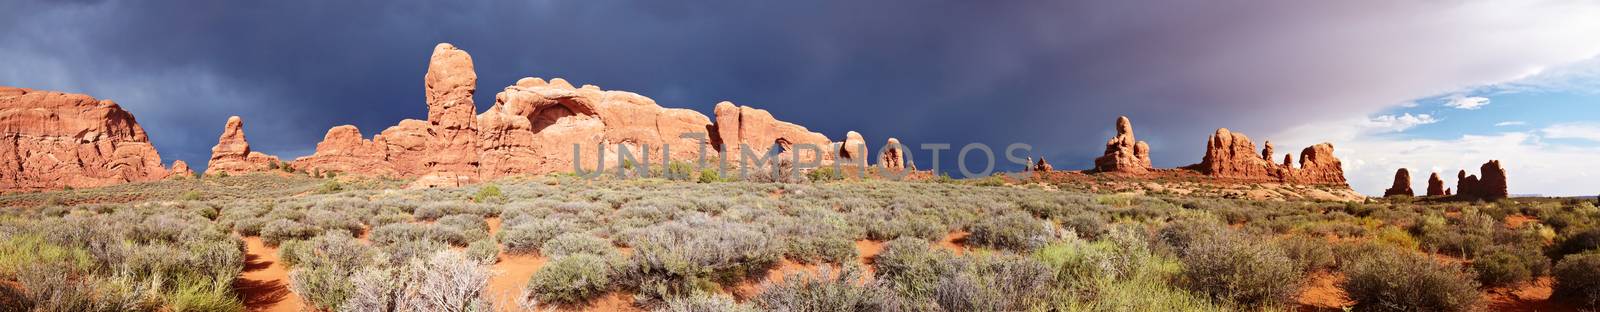 Desert after the Storm panorama by LoonChild